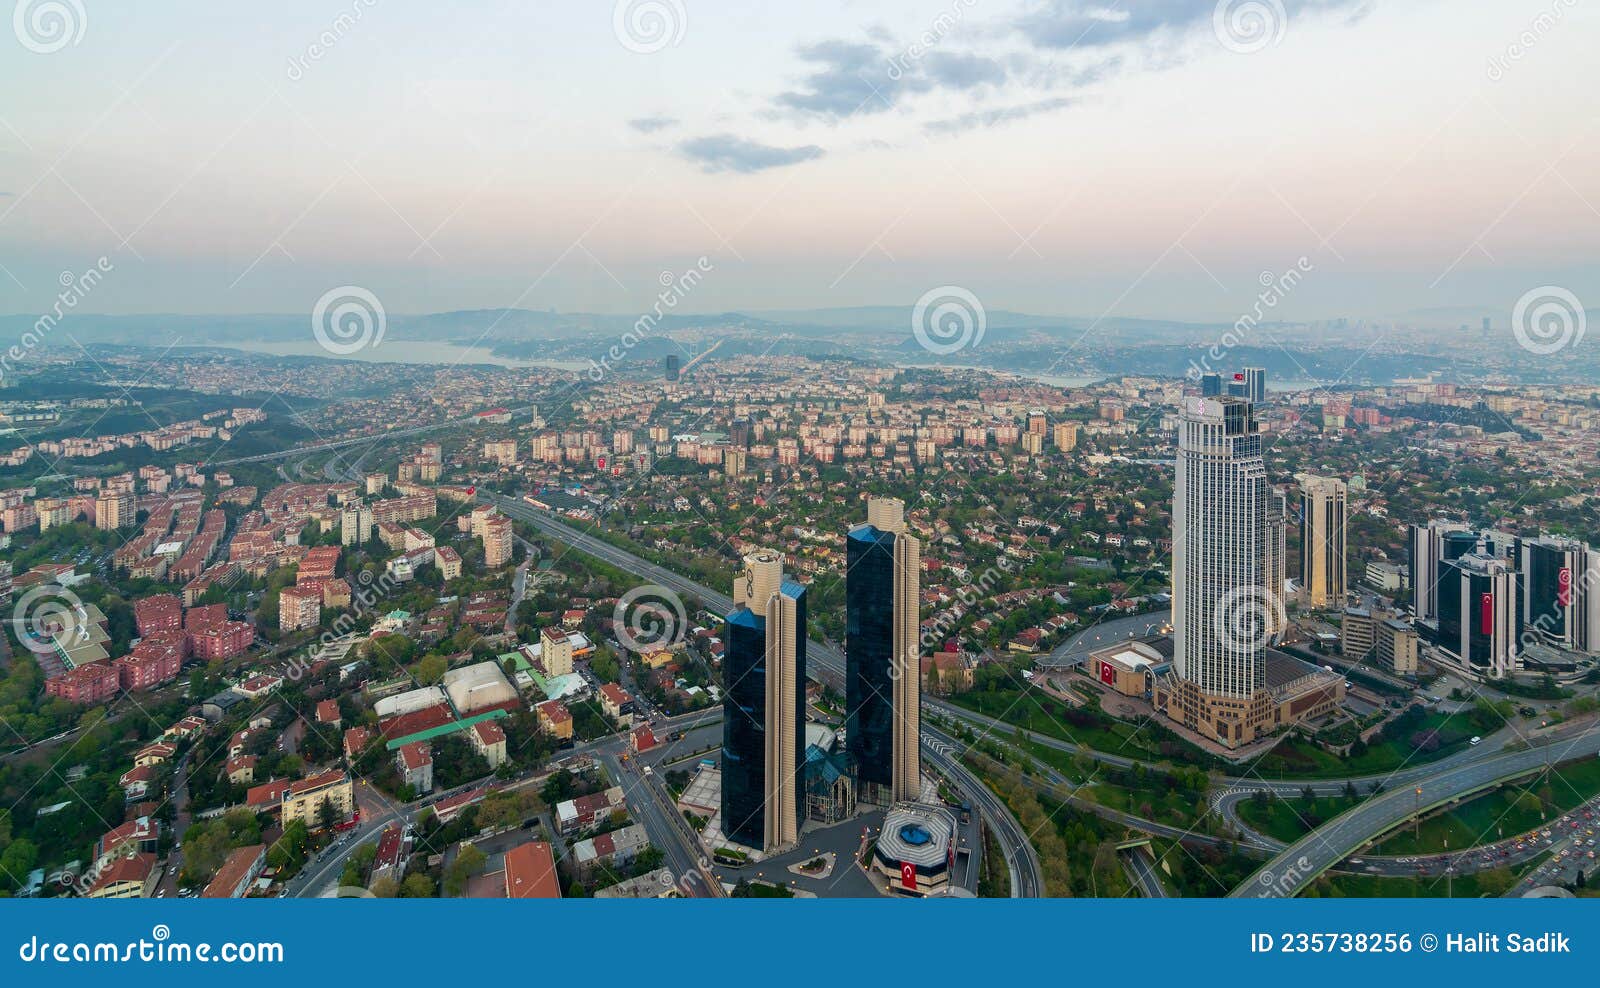 329 istanbul sapphire photos free royalty free stock photos from dreamstime